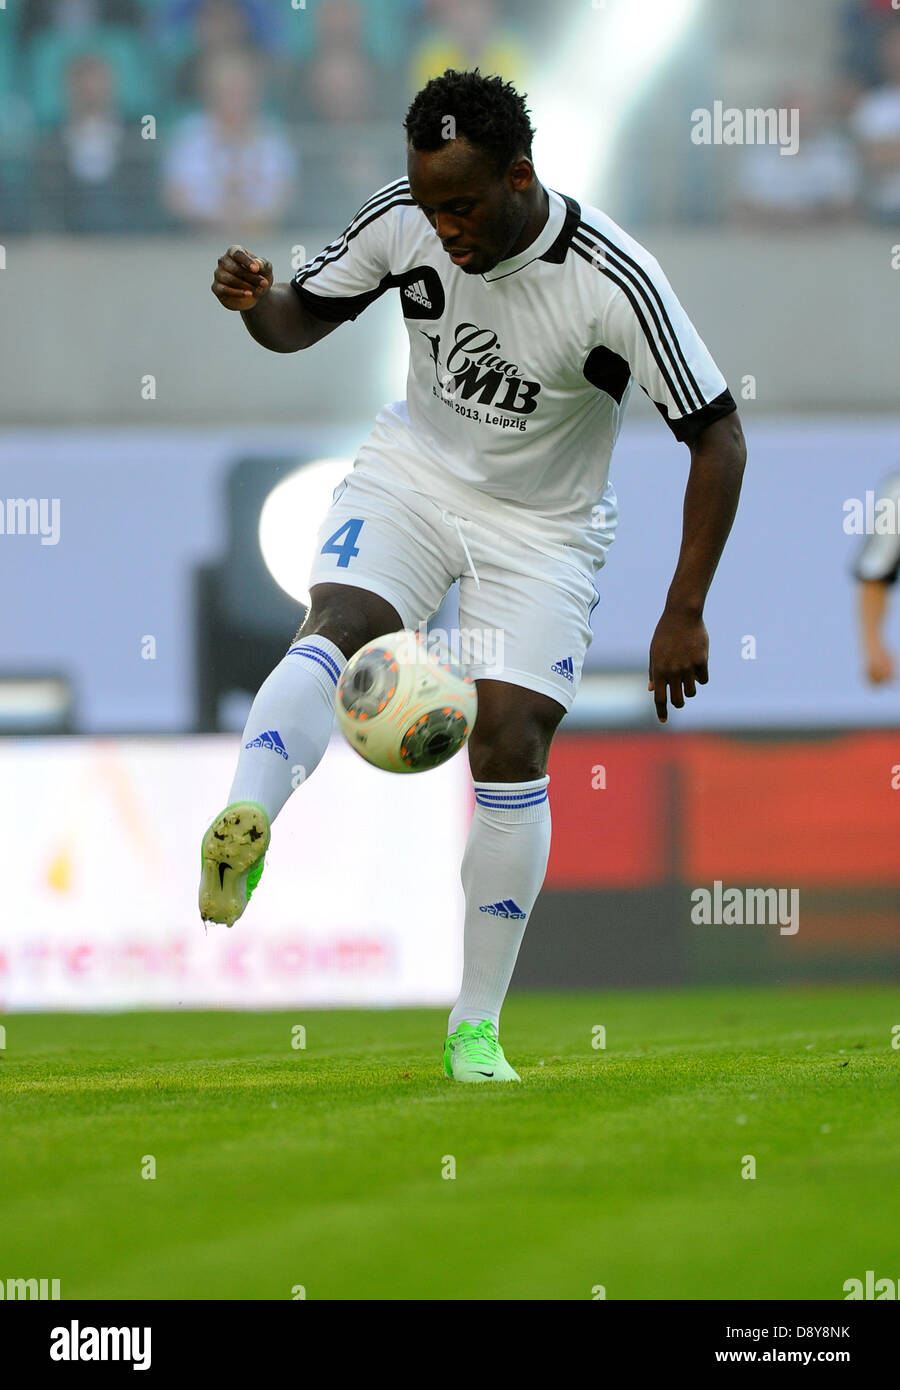 Michael Essien is pictured during Michael Ballack's farewell match at Red Bull Arena in Leipzig, Germany, 05 June 2013. Photo. Thomas Eisenhuth Stock Photo